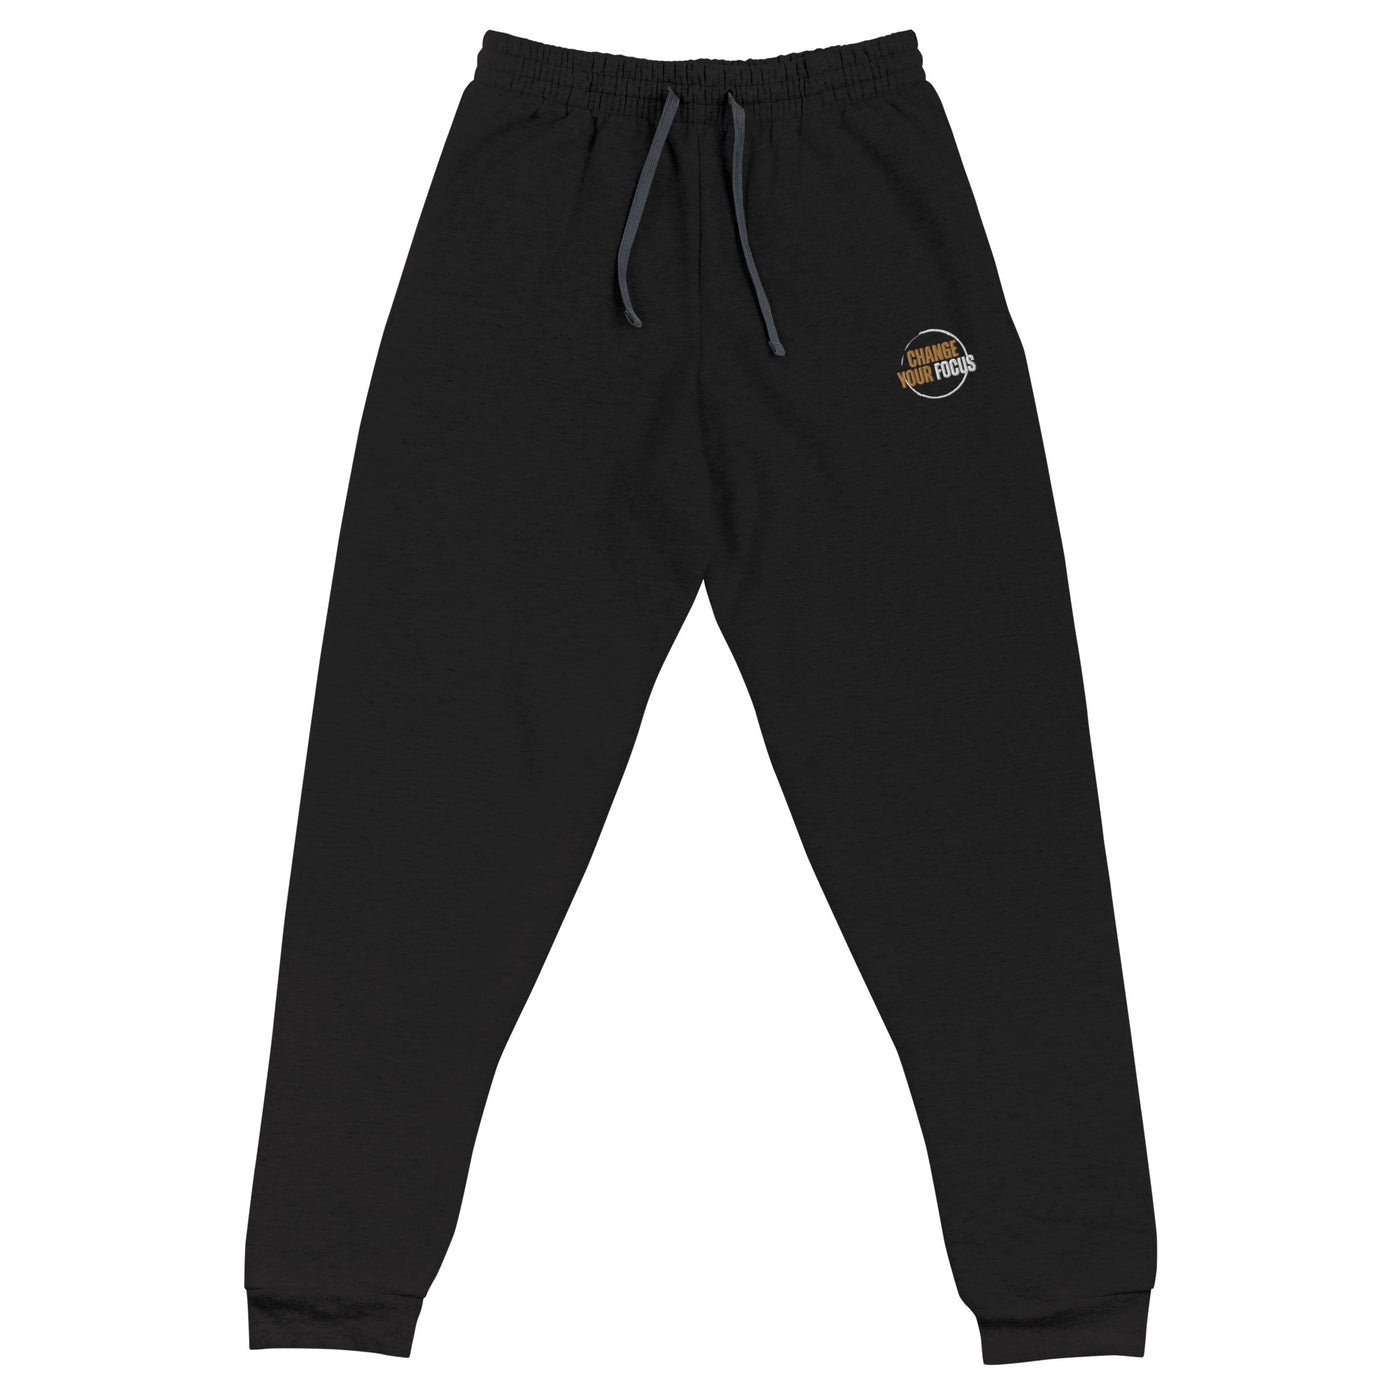 Women's Black Embroidered Joggers - Change Your Focus